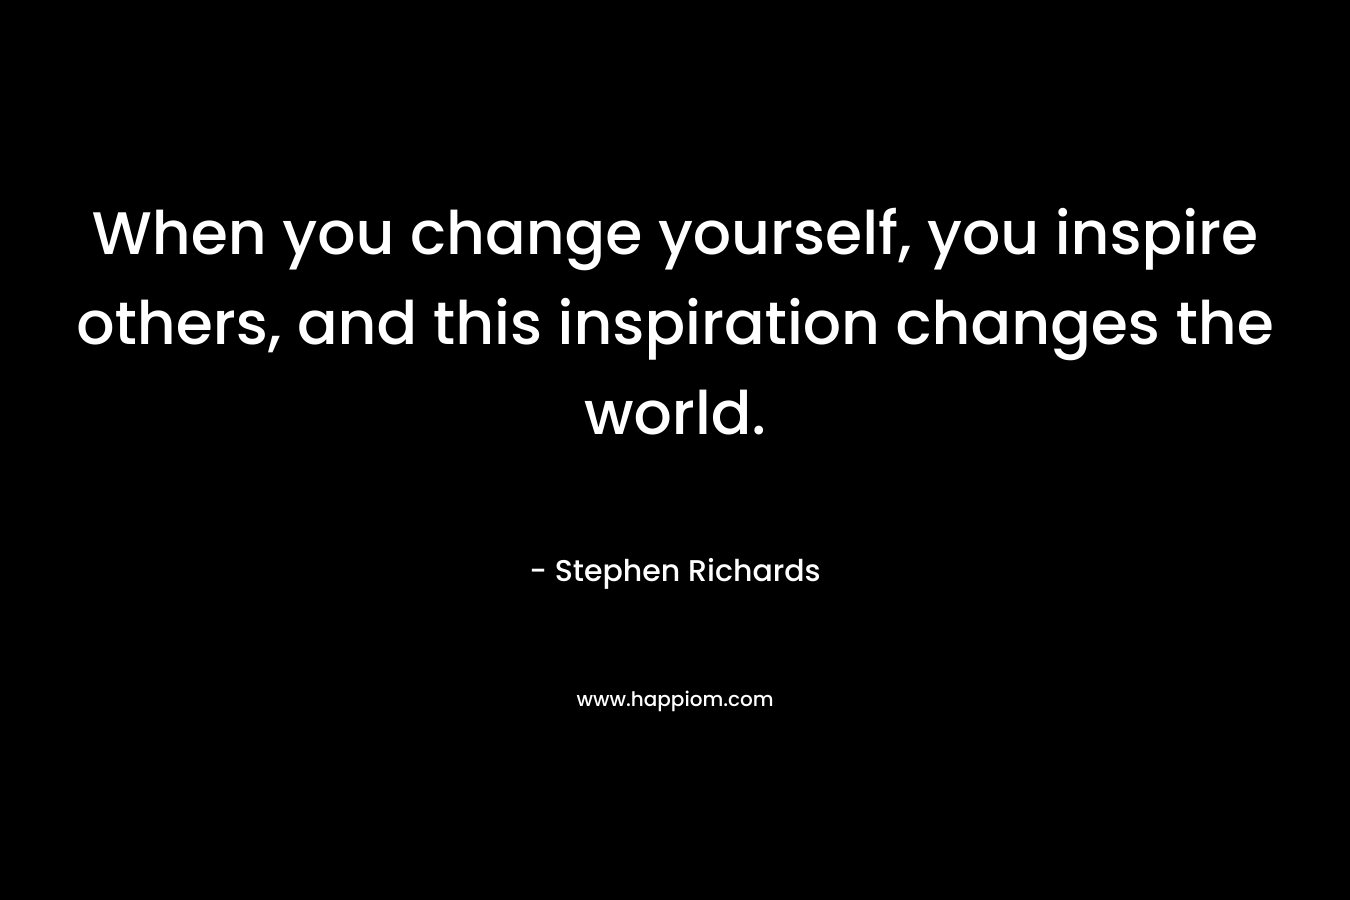 When you change yourself, you inspire others, and this inspiration changes the world. – Stephen Richards